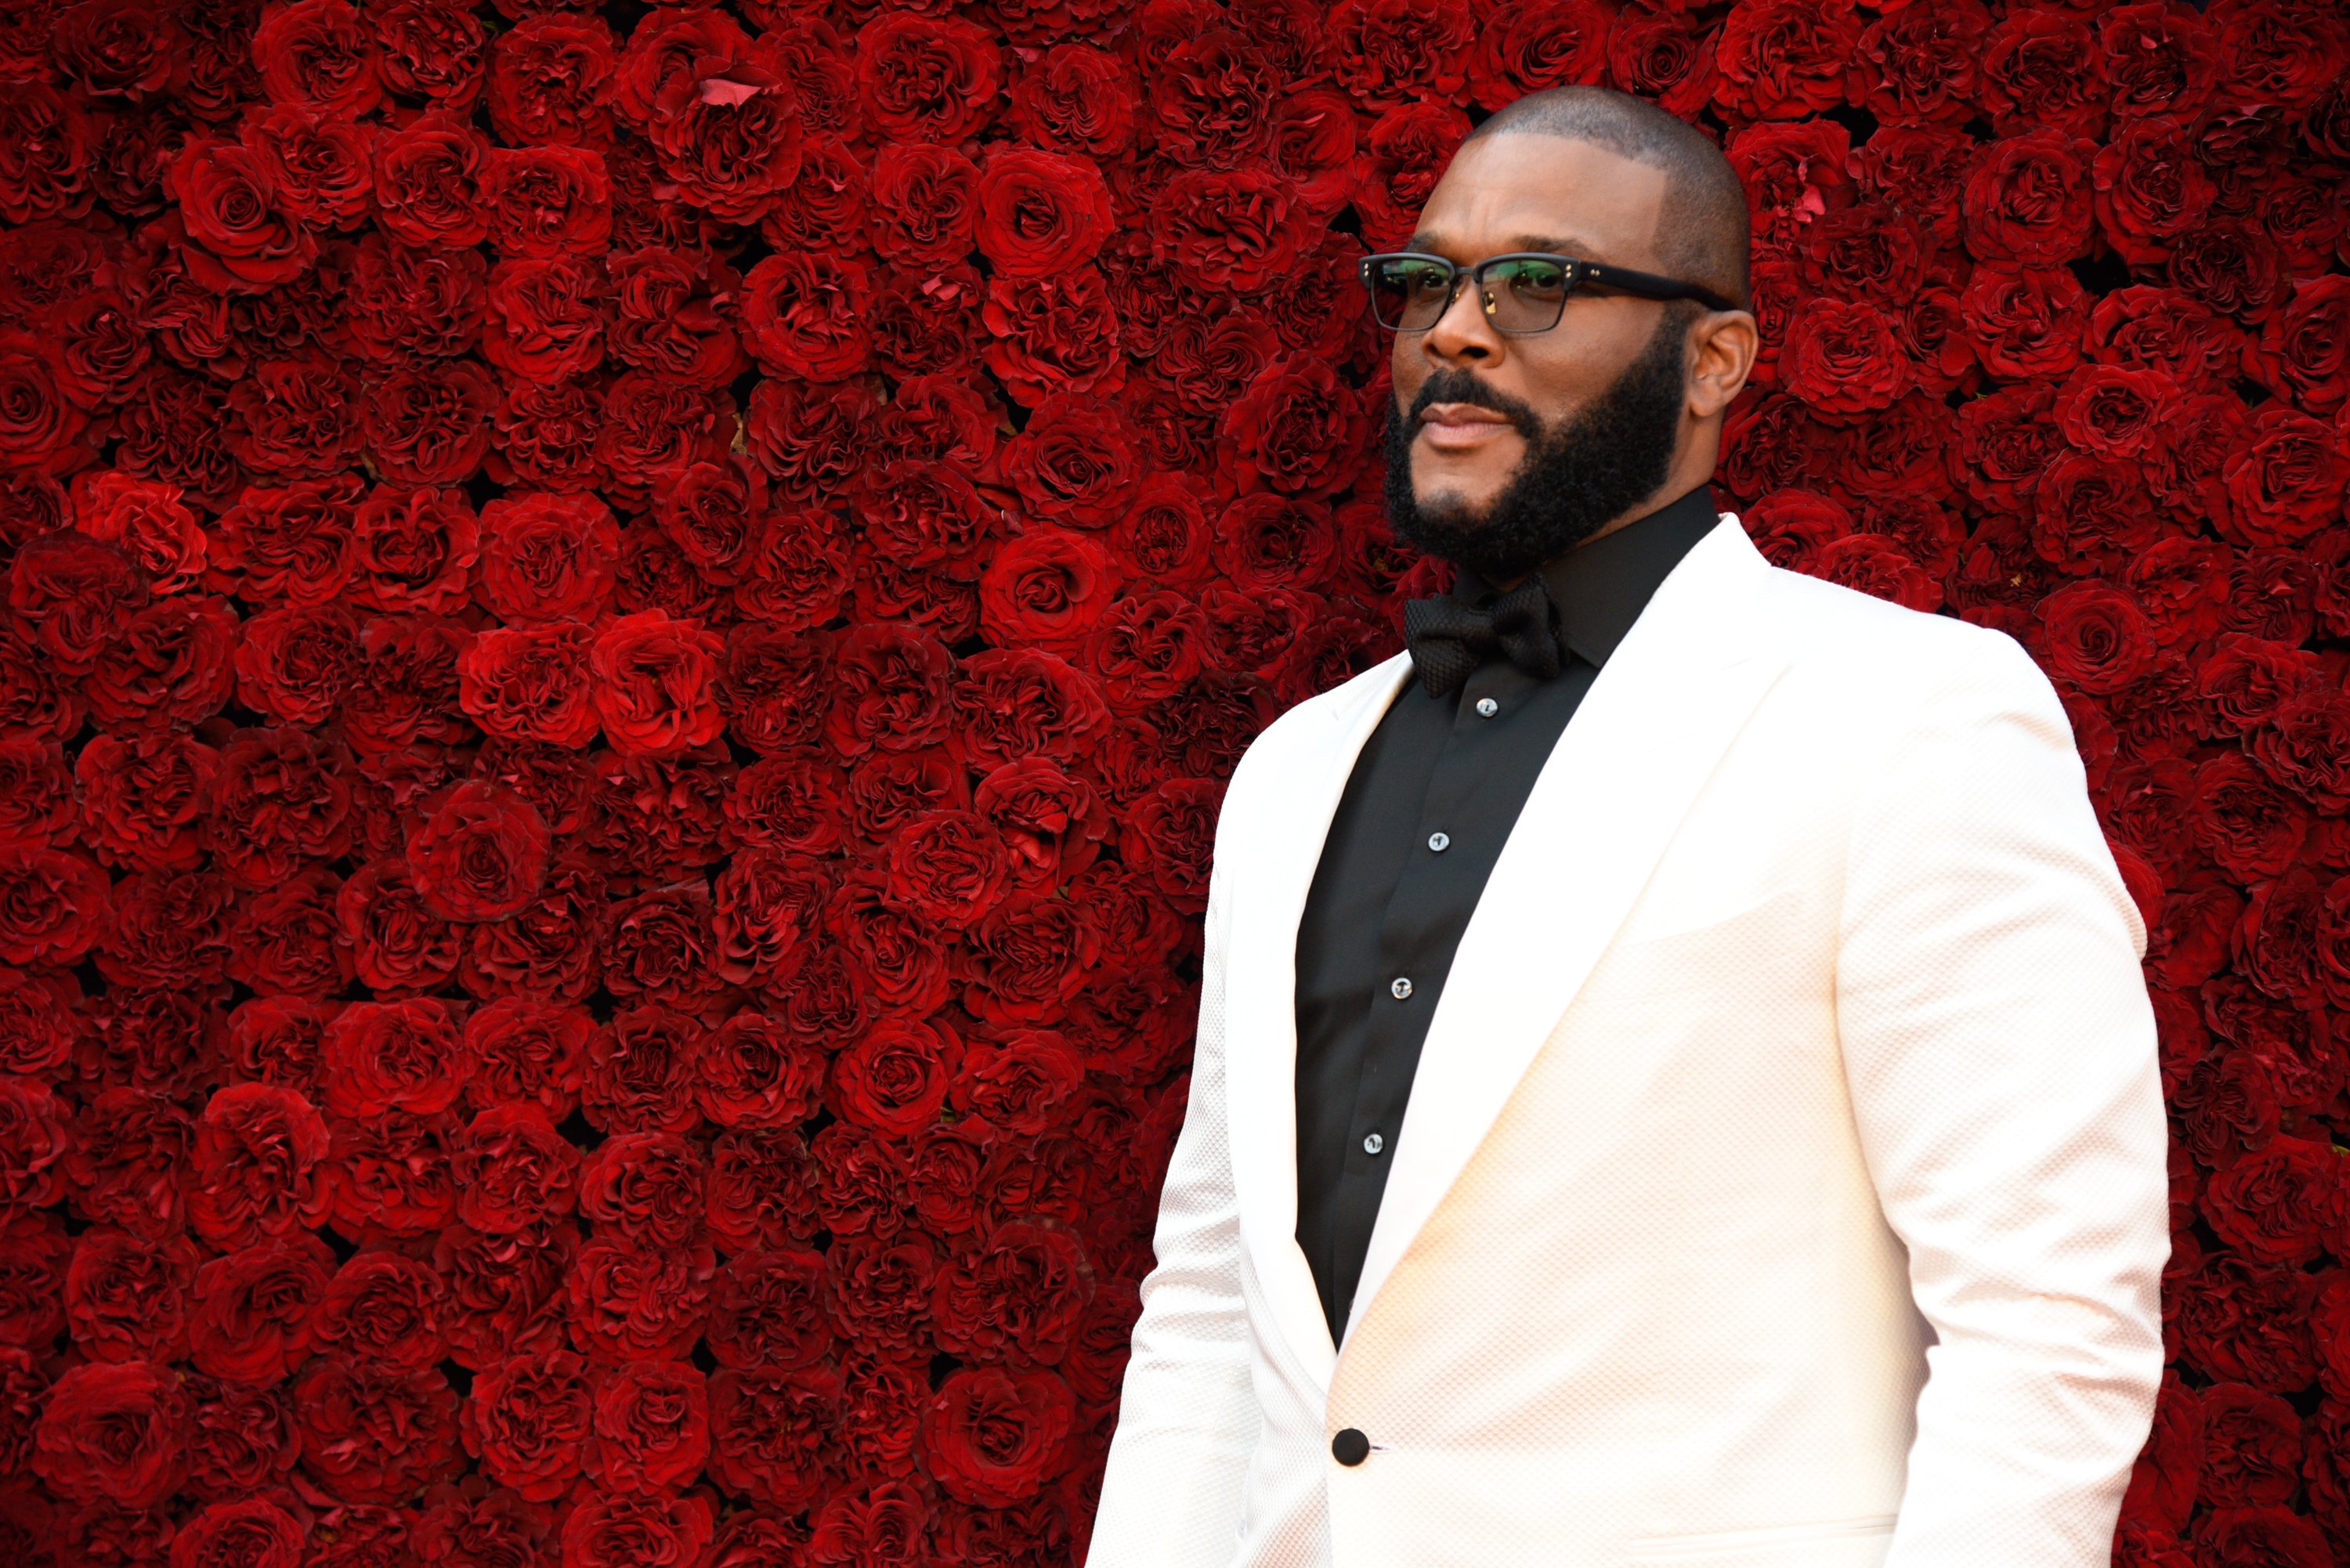 Tyler Perry attends the grand opening of the Tyler Perry Studios on October 5, 2019 in Atlanta, Georgia. | Photo: Getty Images